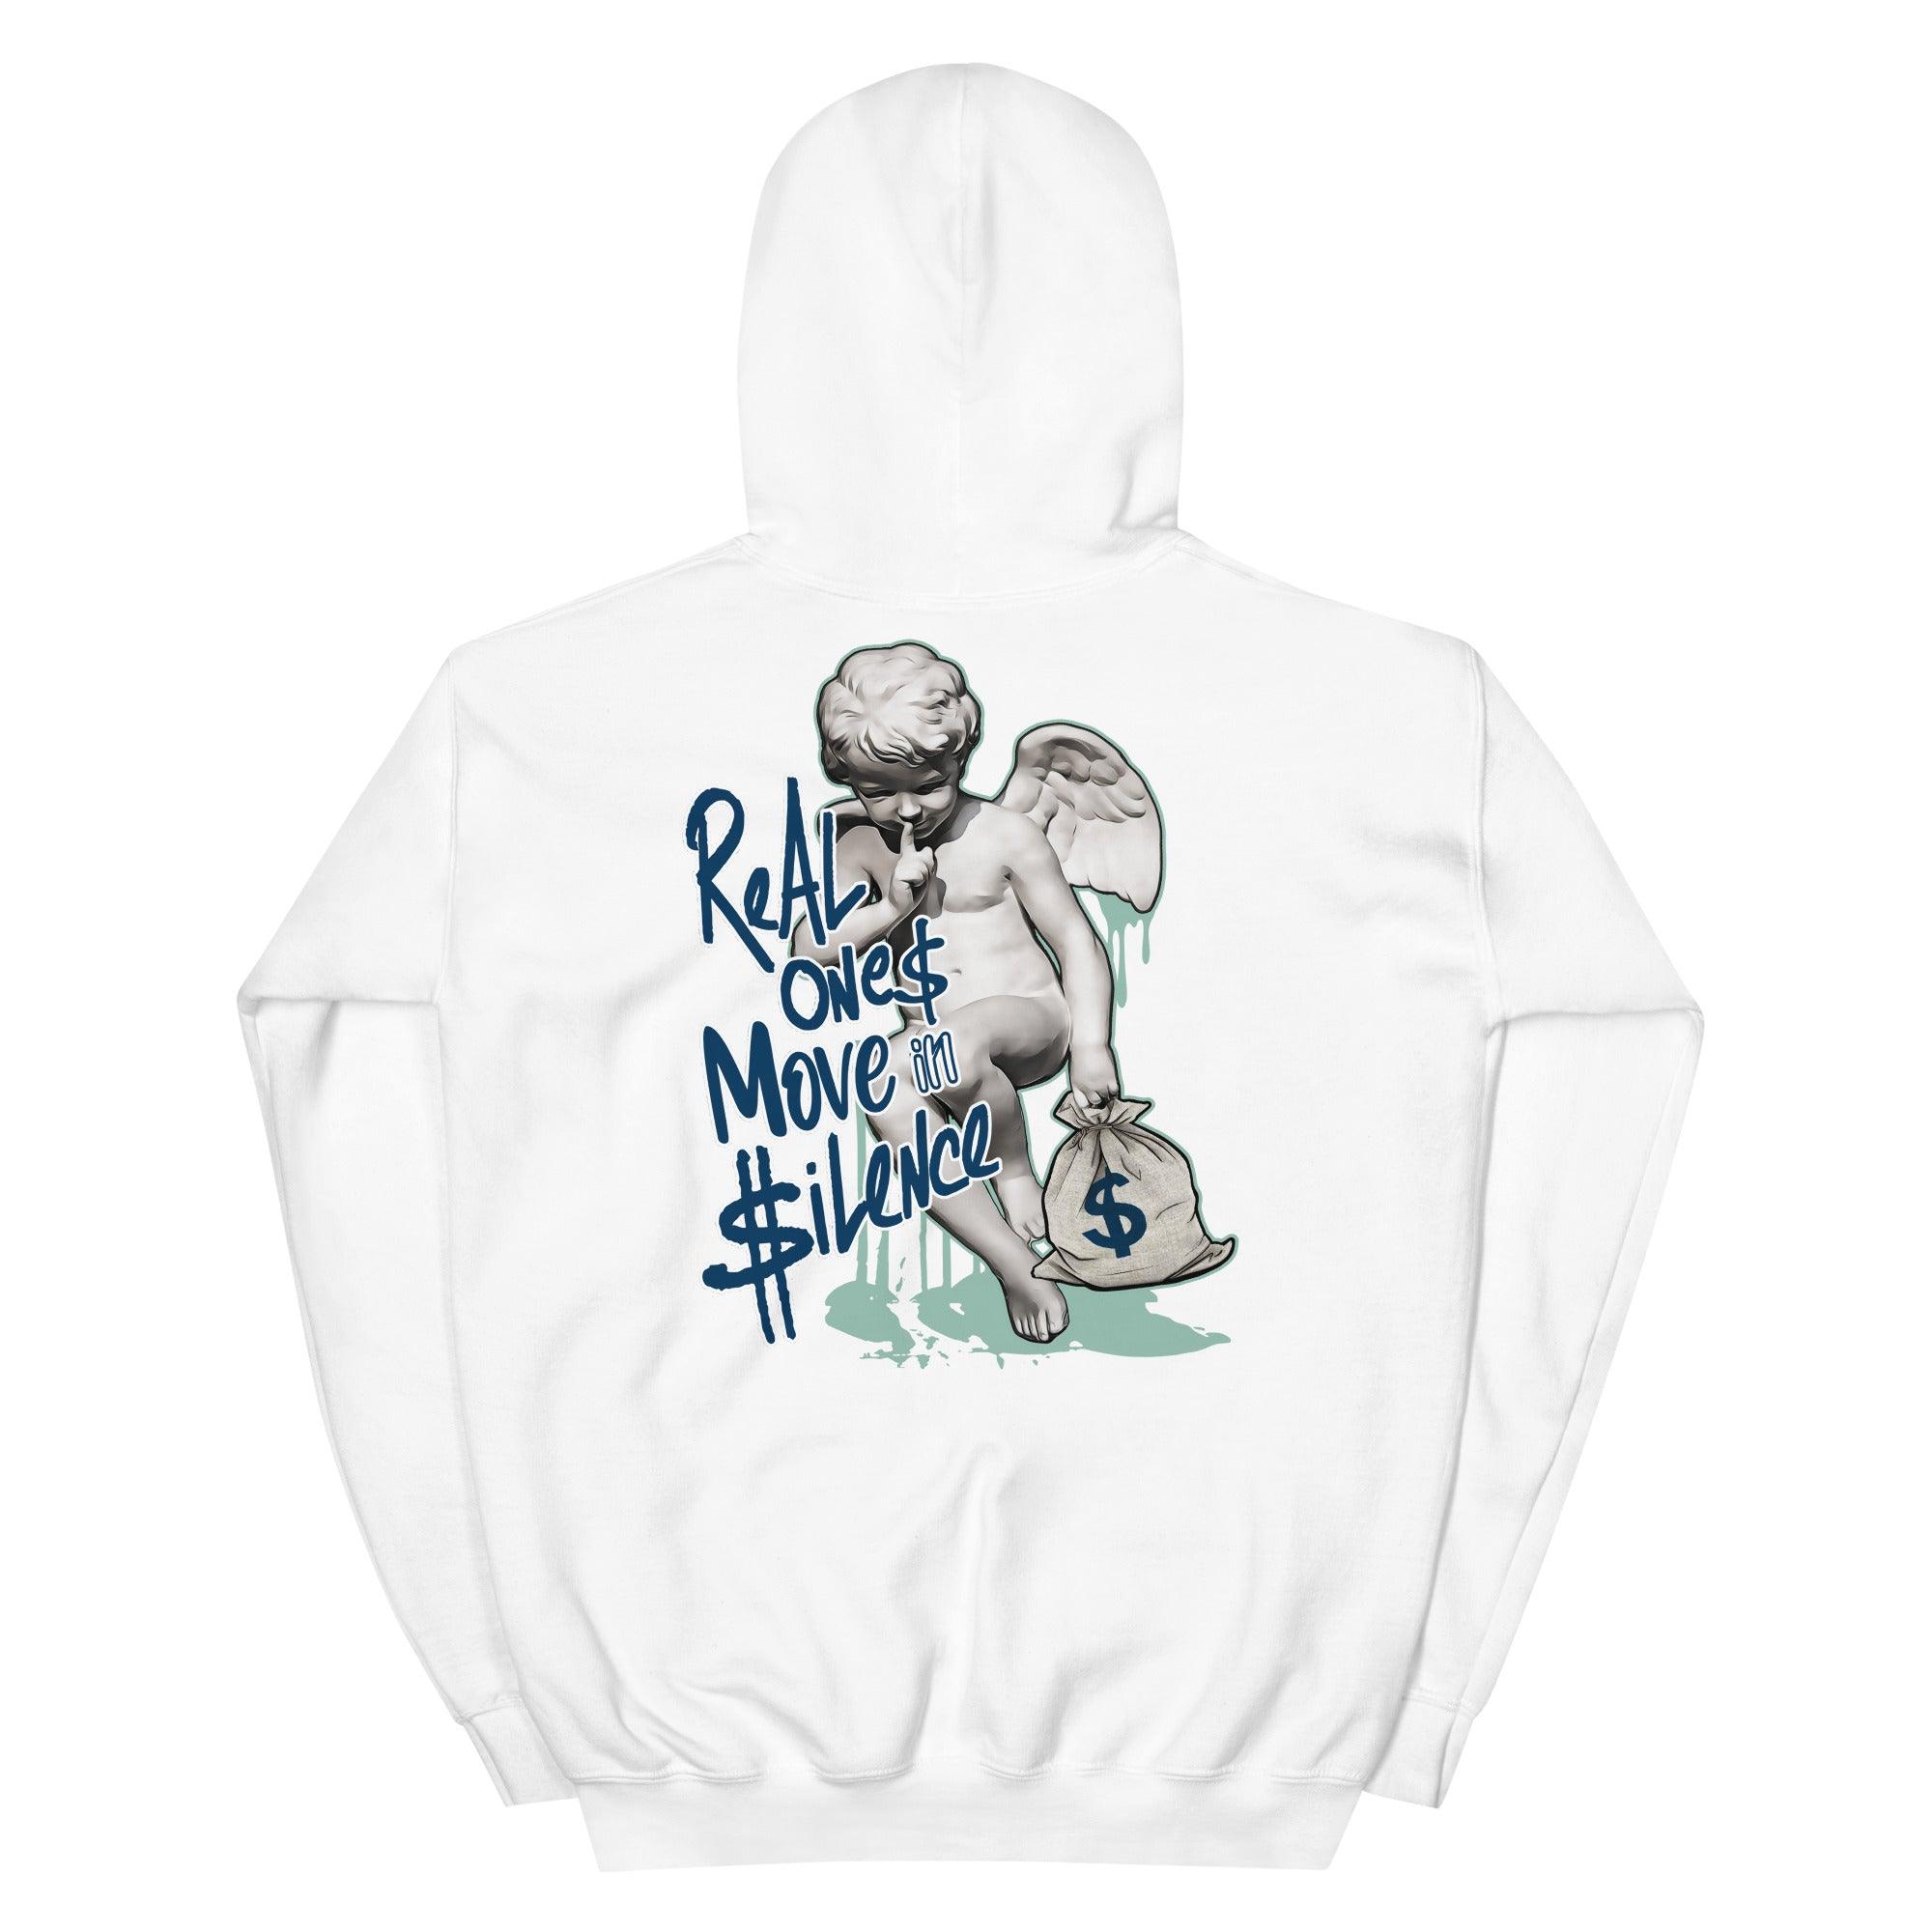 White Real Ones Move In Silence Hoodie AJ 1 Mid Mystic Navy Mint Foam photo